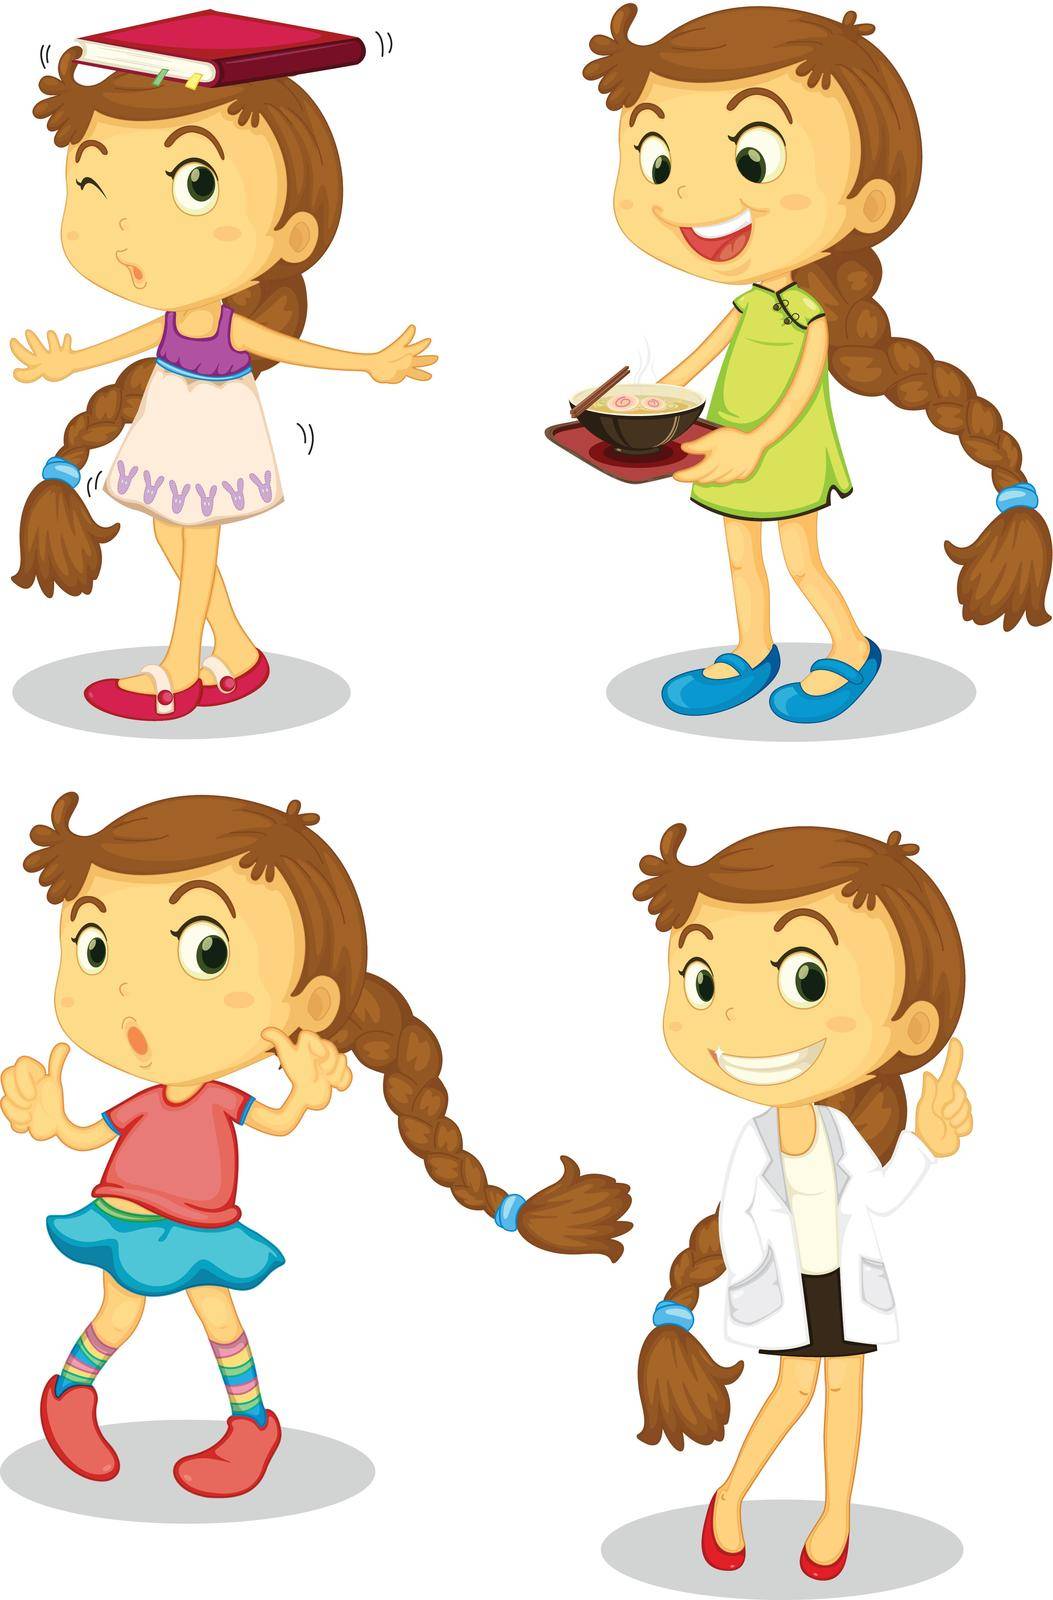 Illustration of a series of a cute girl